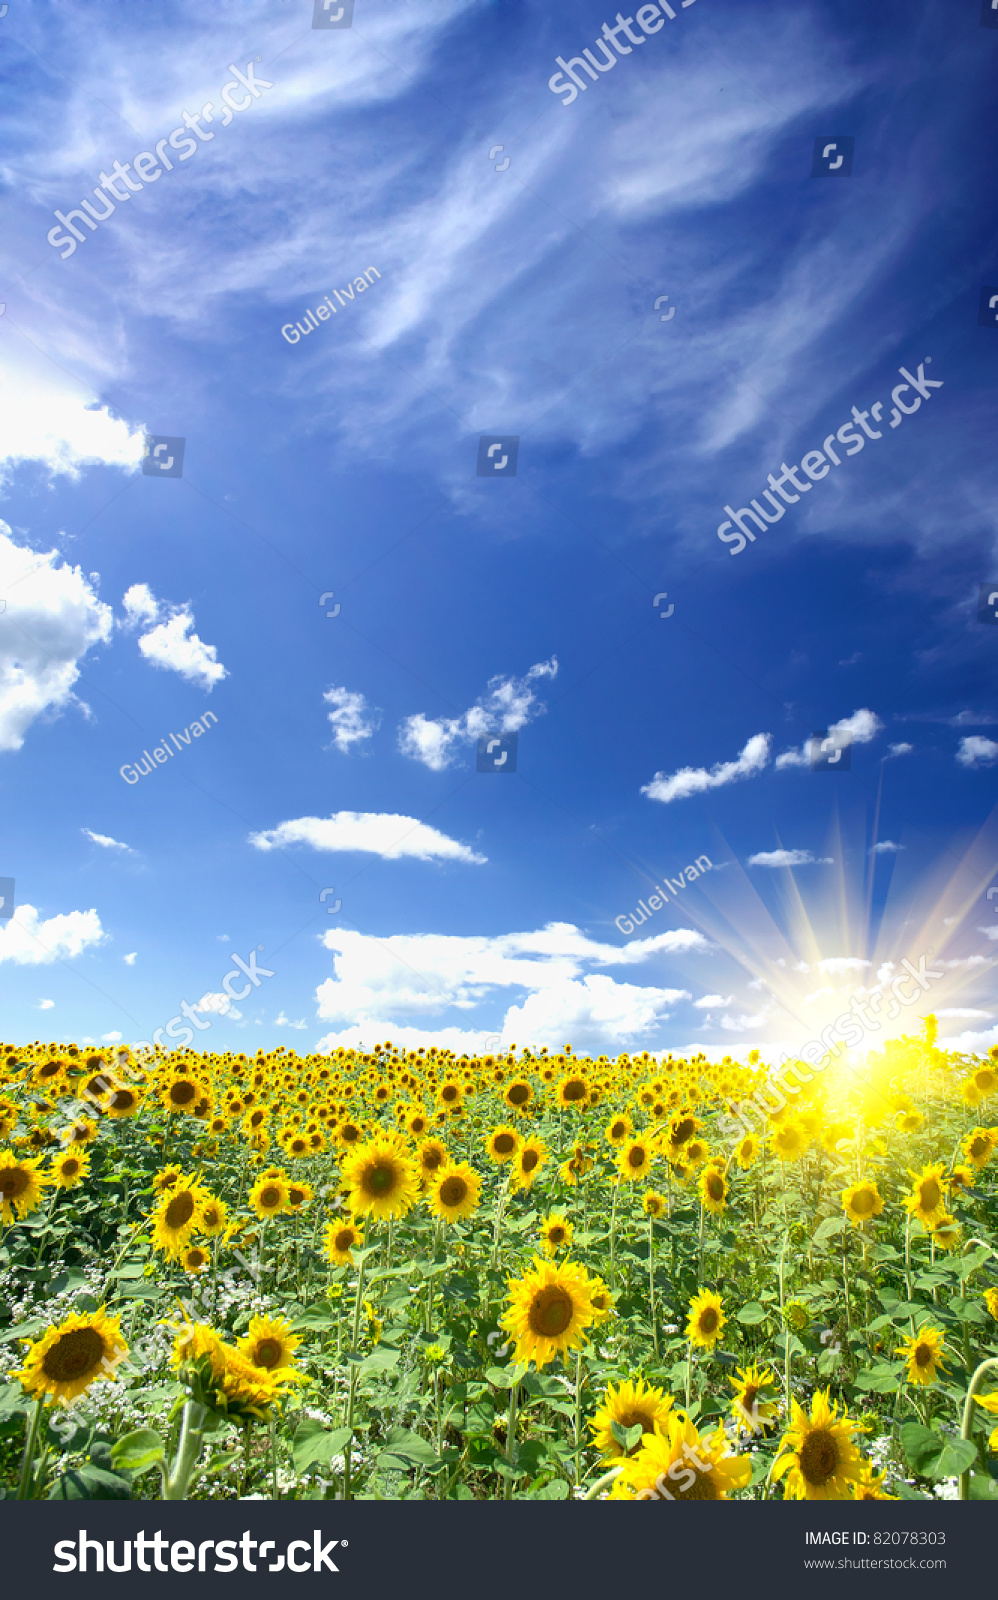 Wonderful Summer Field Of Sunflowers And Sun In The Blue ...